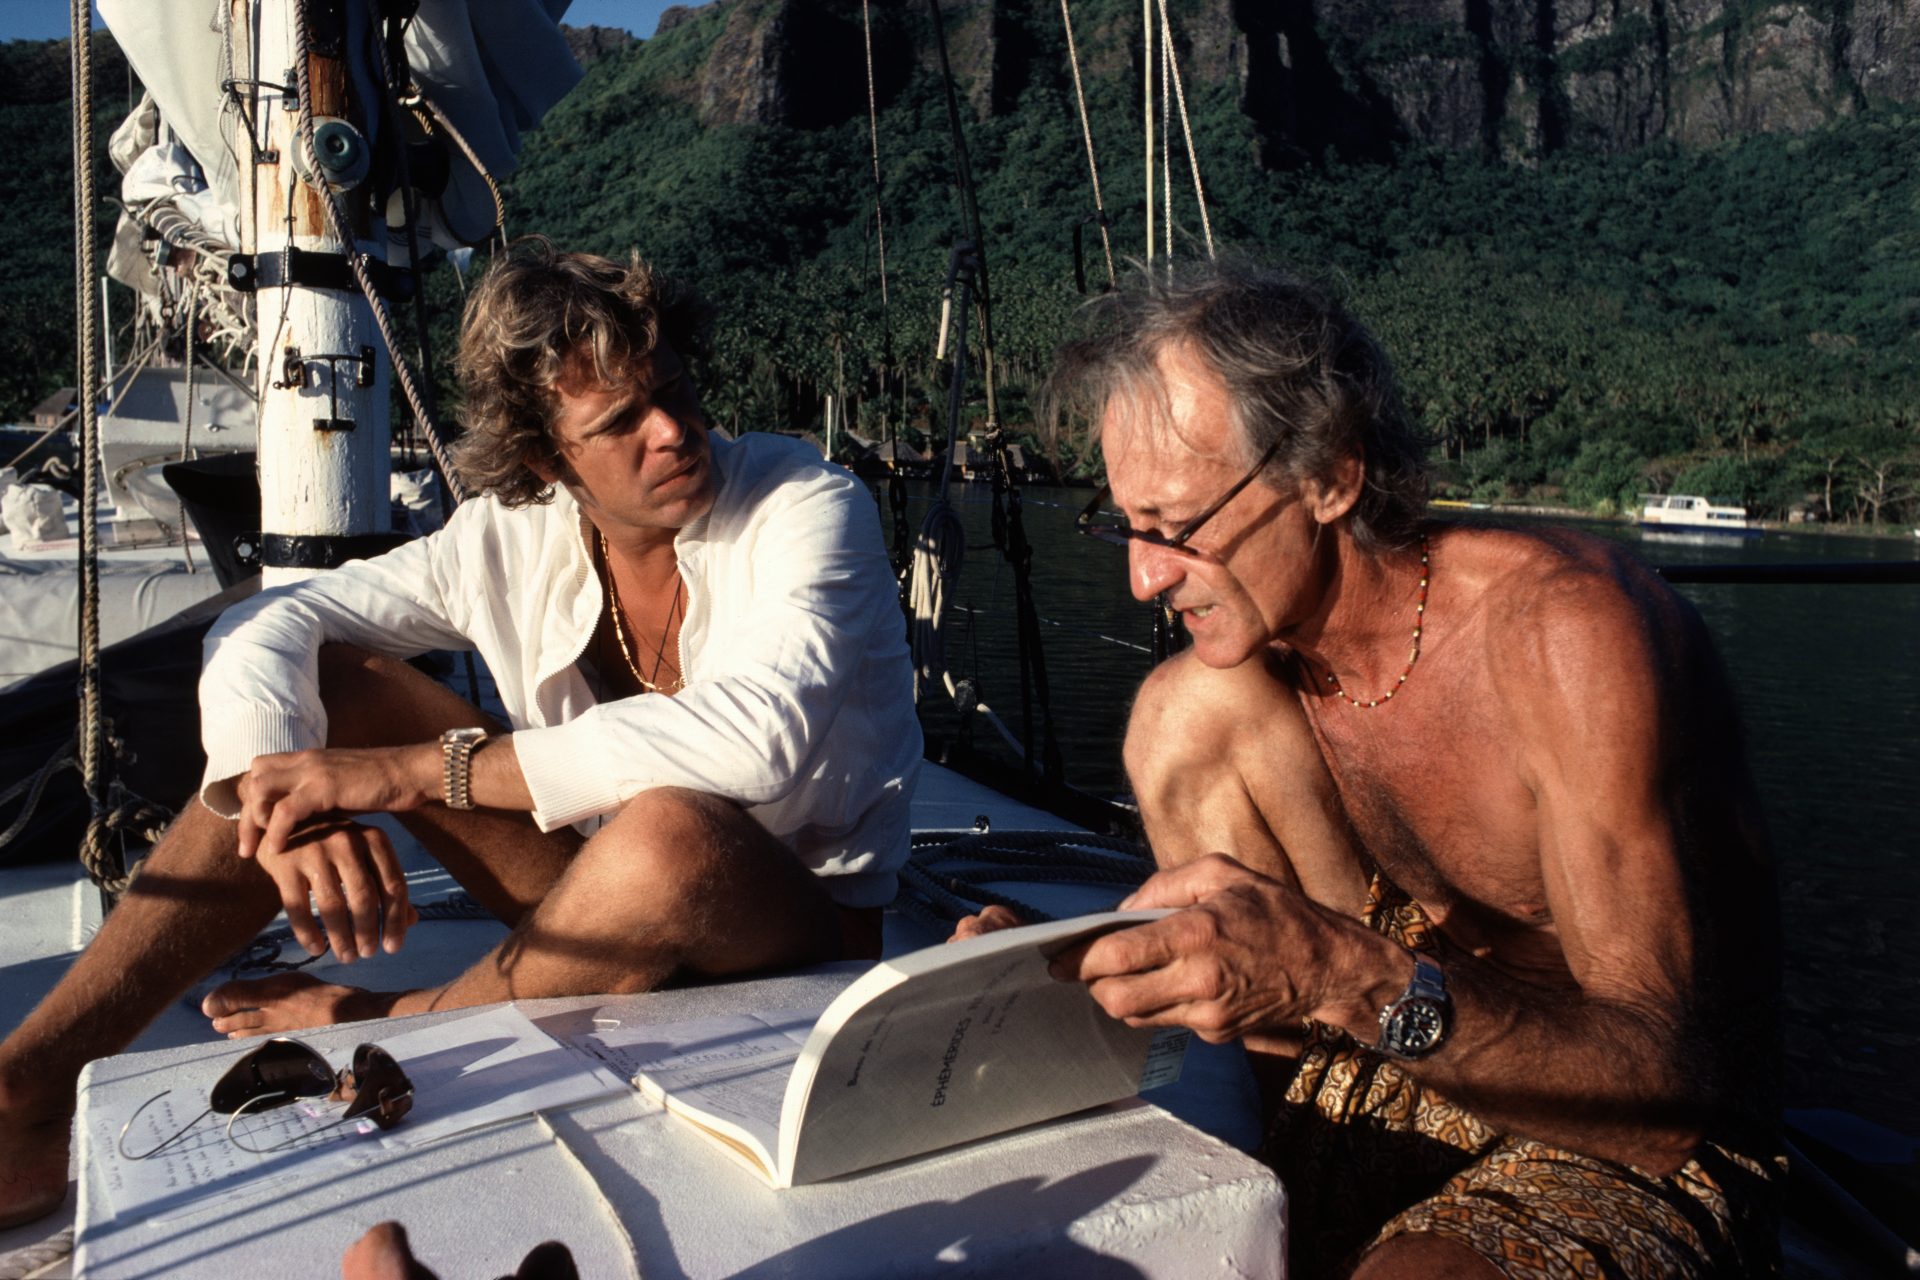 <p><span>Bernard Moitessier was another recognized sailor within the community and was an experienced sailor in the Southern Ocean. His previous nautical expeditions had proven to be a success after his two books achieved international recognition. The French sailor had a custom-built 39ft steel ketch named Joshua for the race.</span></p>